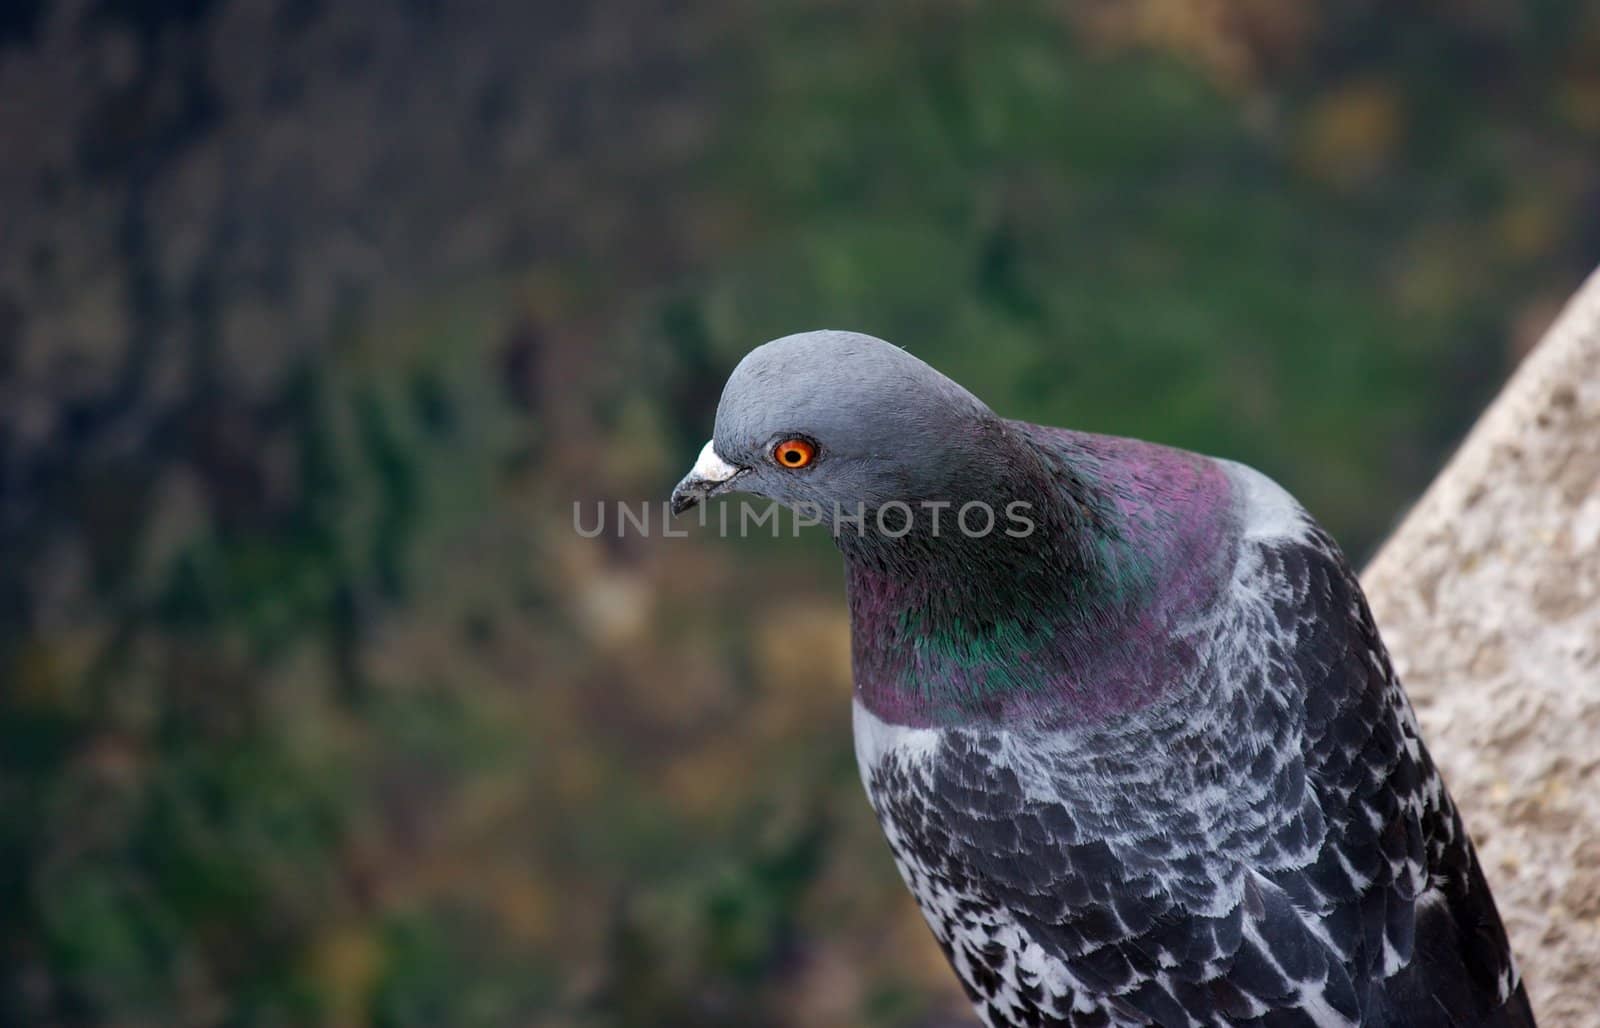 Closeup of a pigeon with blurred background